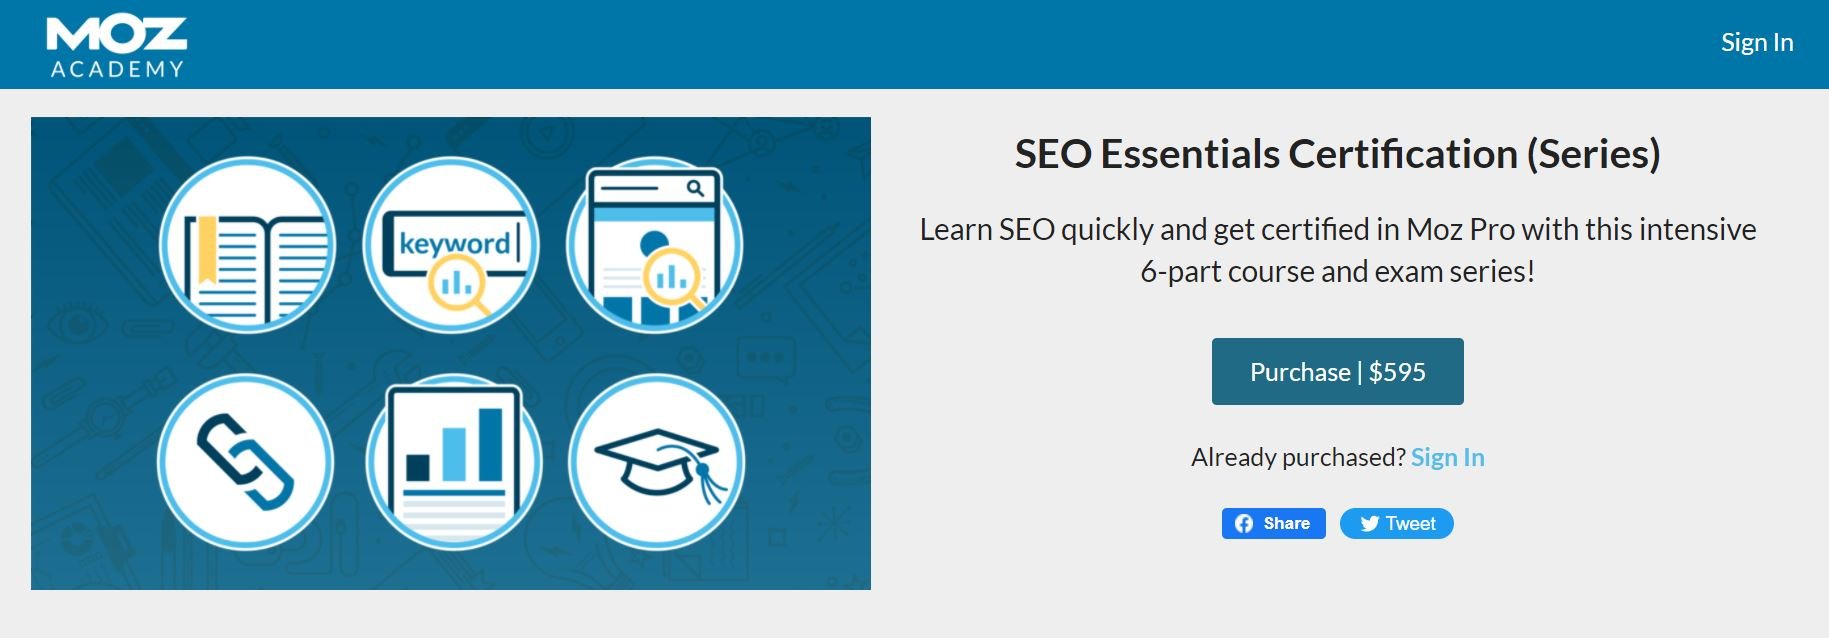 7-best-seo-training-courses-to-take-right-now-6 7 最好的 SEO 培訓課程現在就參加